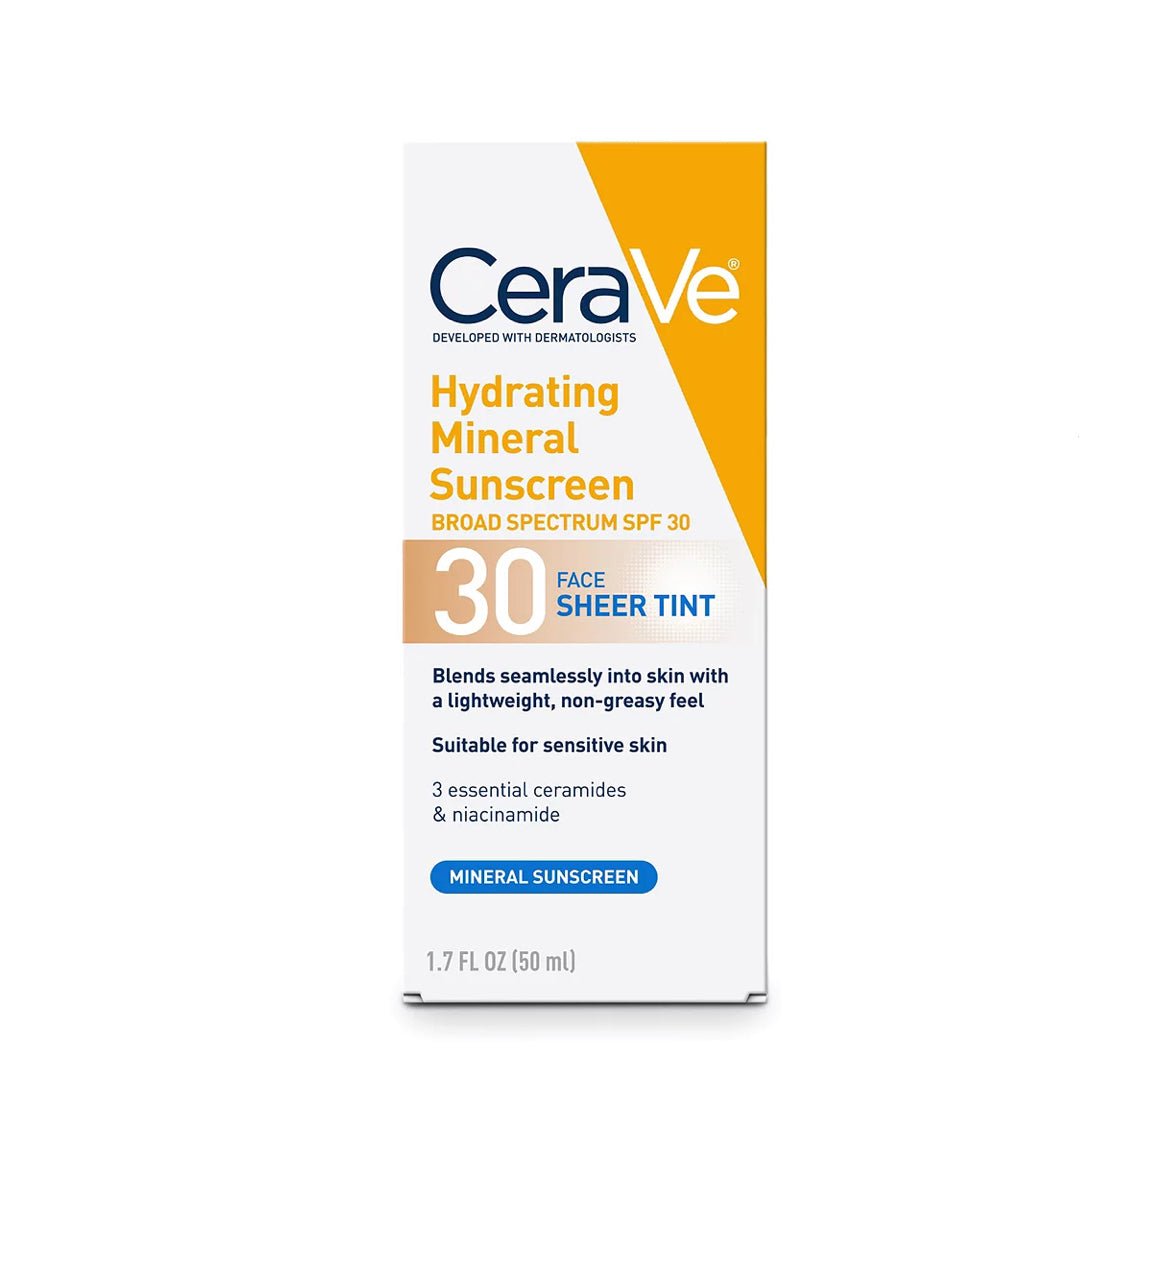 Cerave Hydrating Mineral Sunscreen face sheer tint SPF 30 - Seraphim Beauty